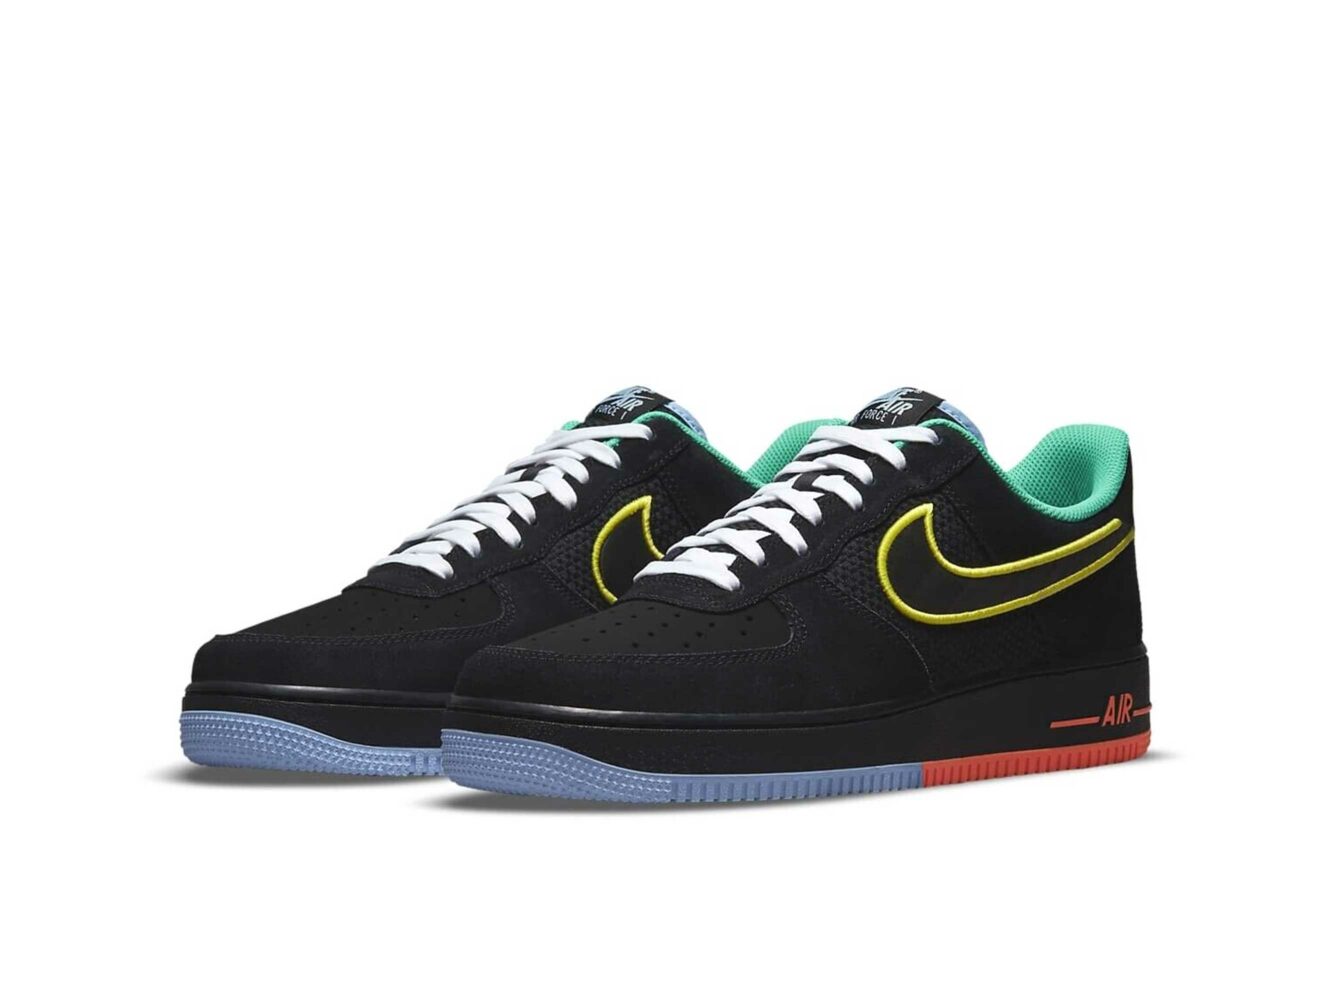 nike air force 1 low peace and unity black green red blue DM9051_001 купить